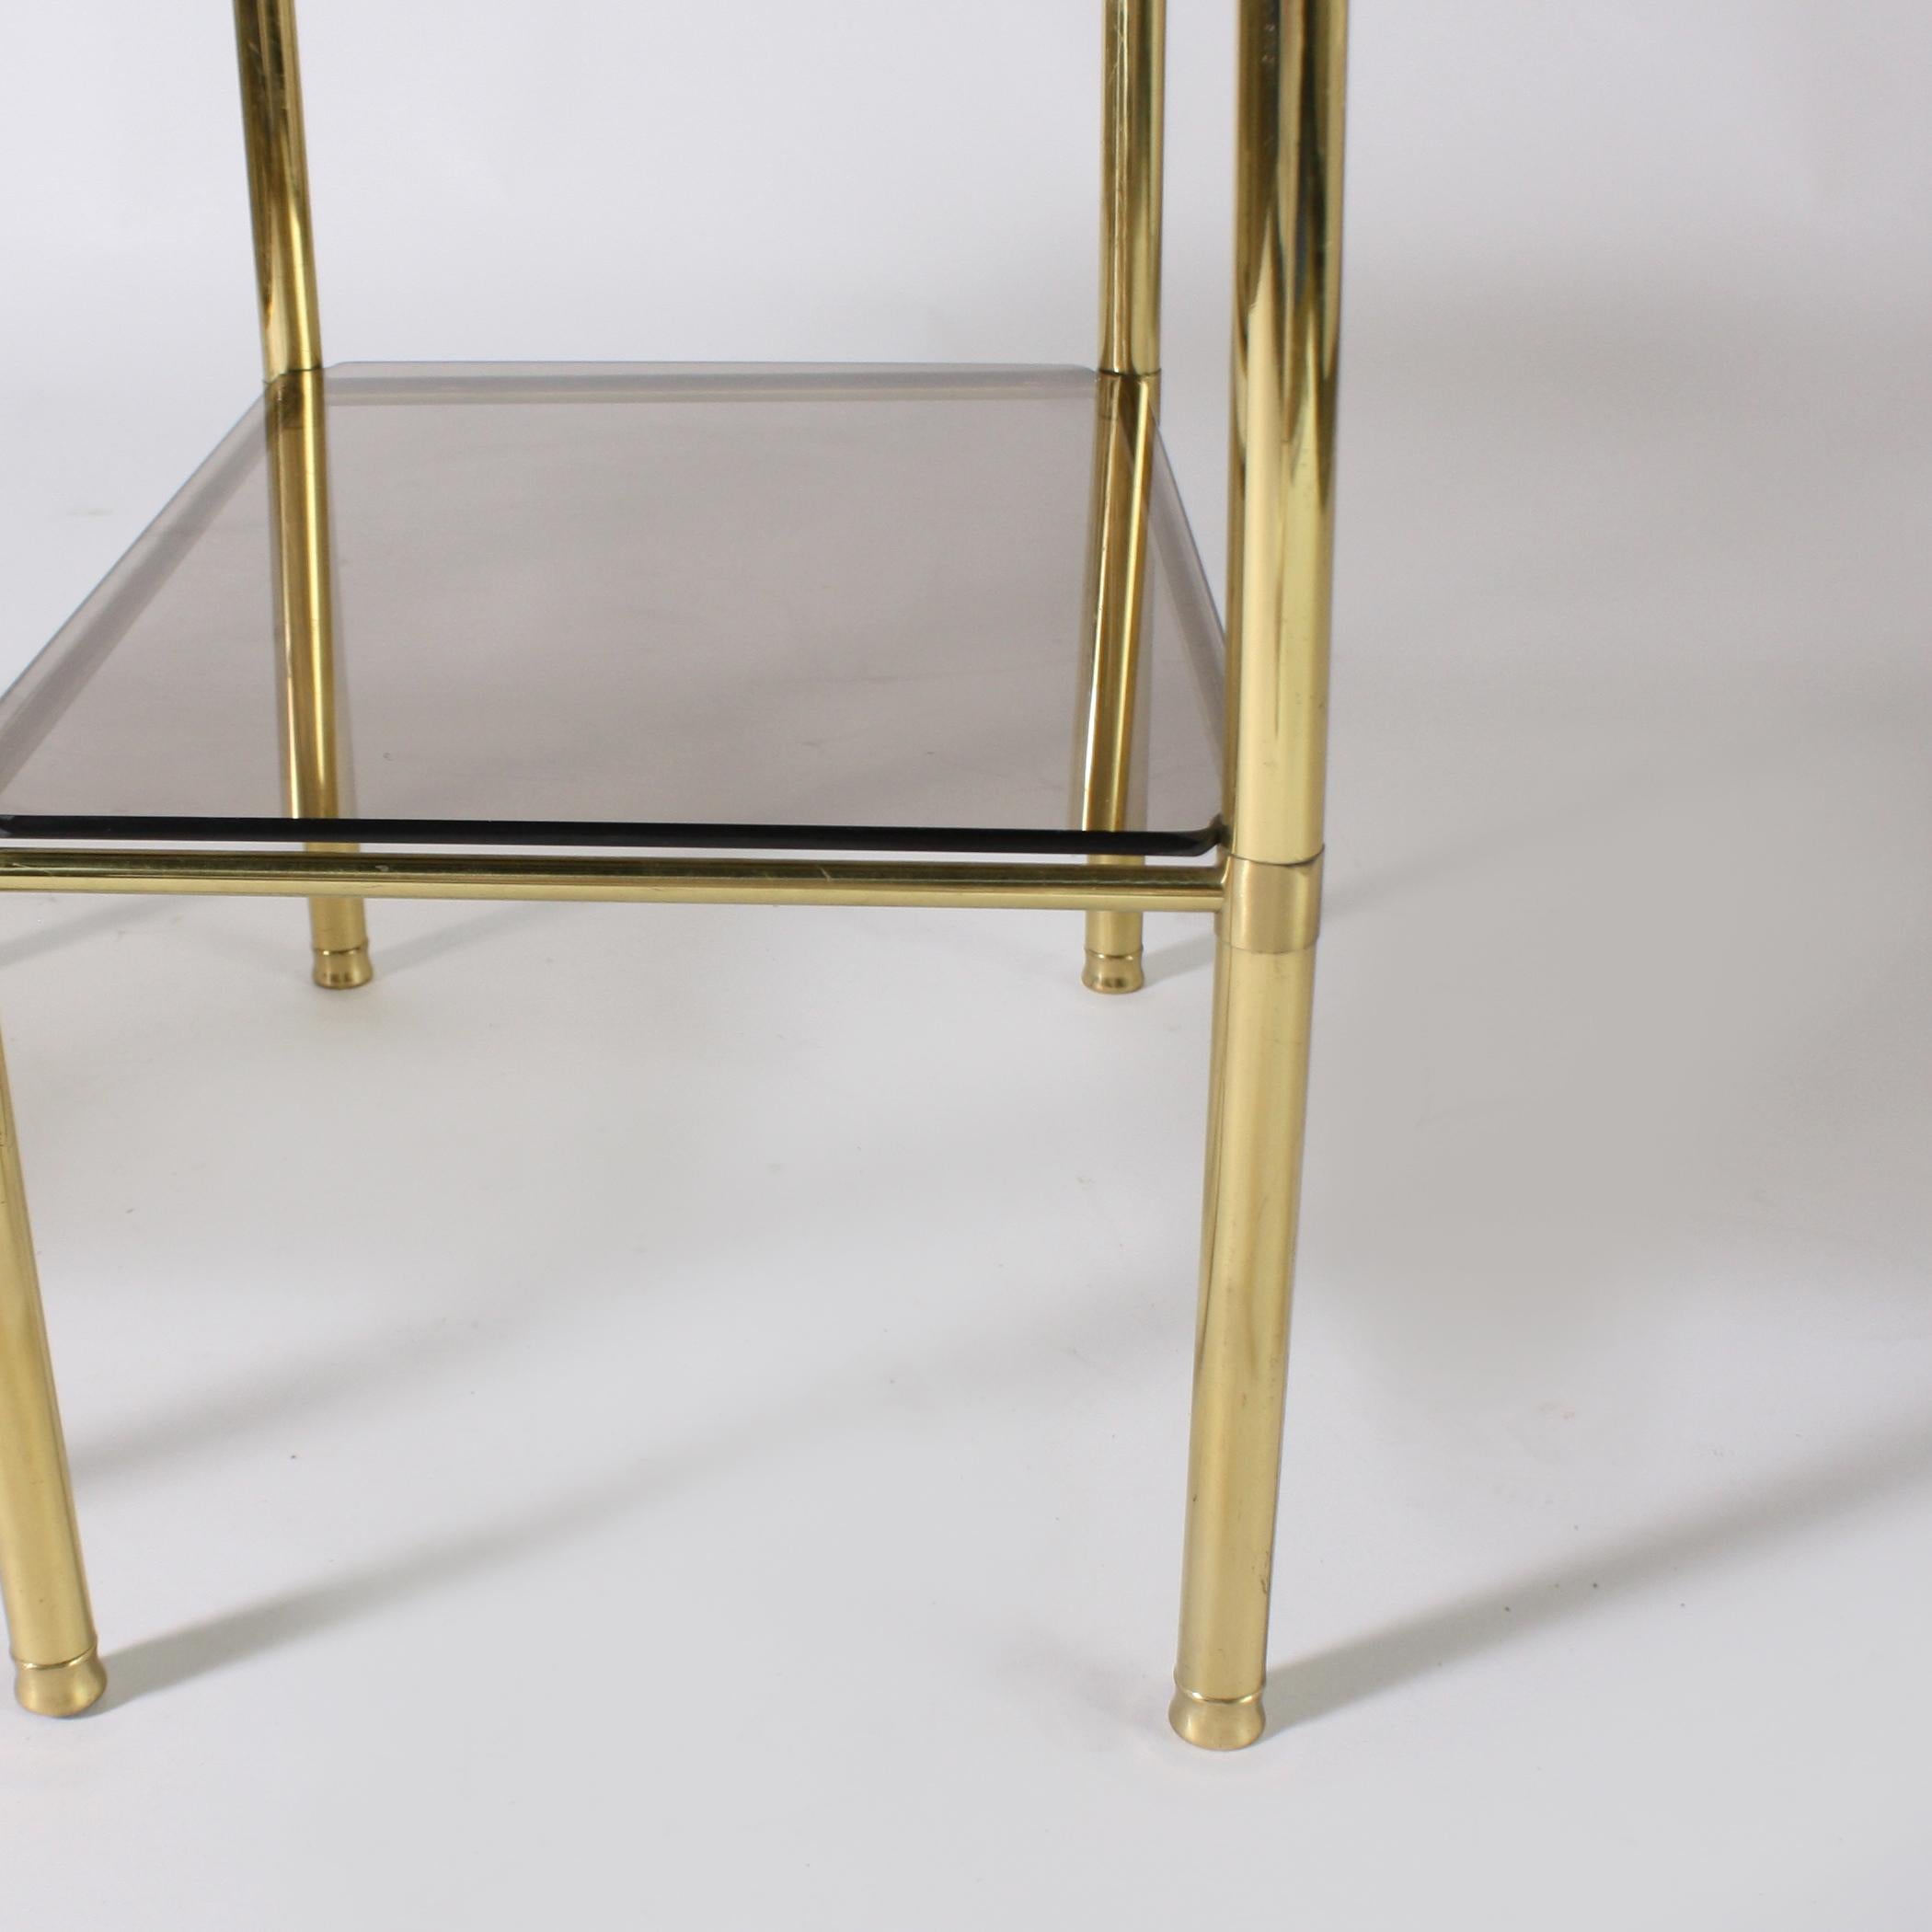 Pair of brass side tables with smoky glass tops, circa 1950.
  